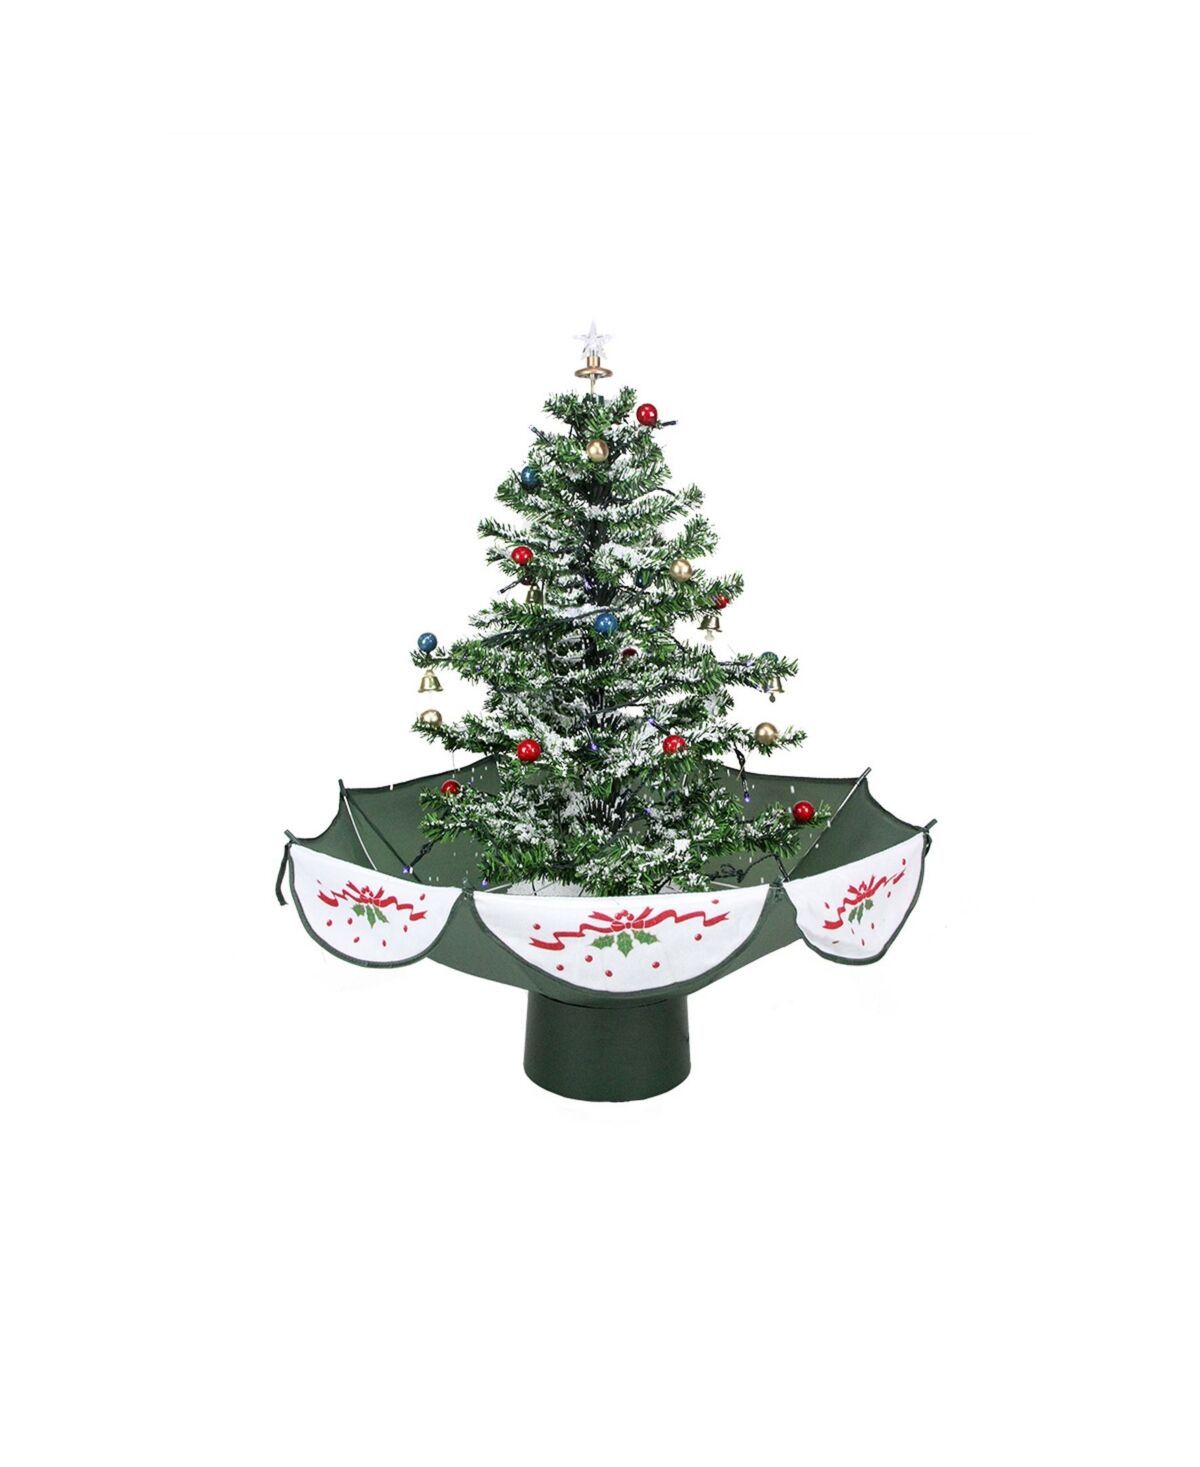 Northlight Pre-Lit Musical Snowing Artificial Christmas Tree - Green